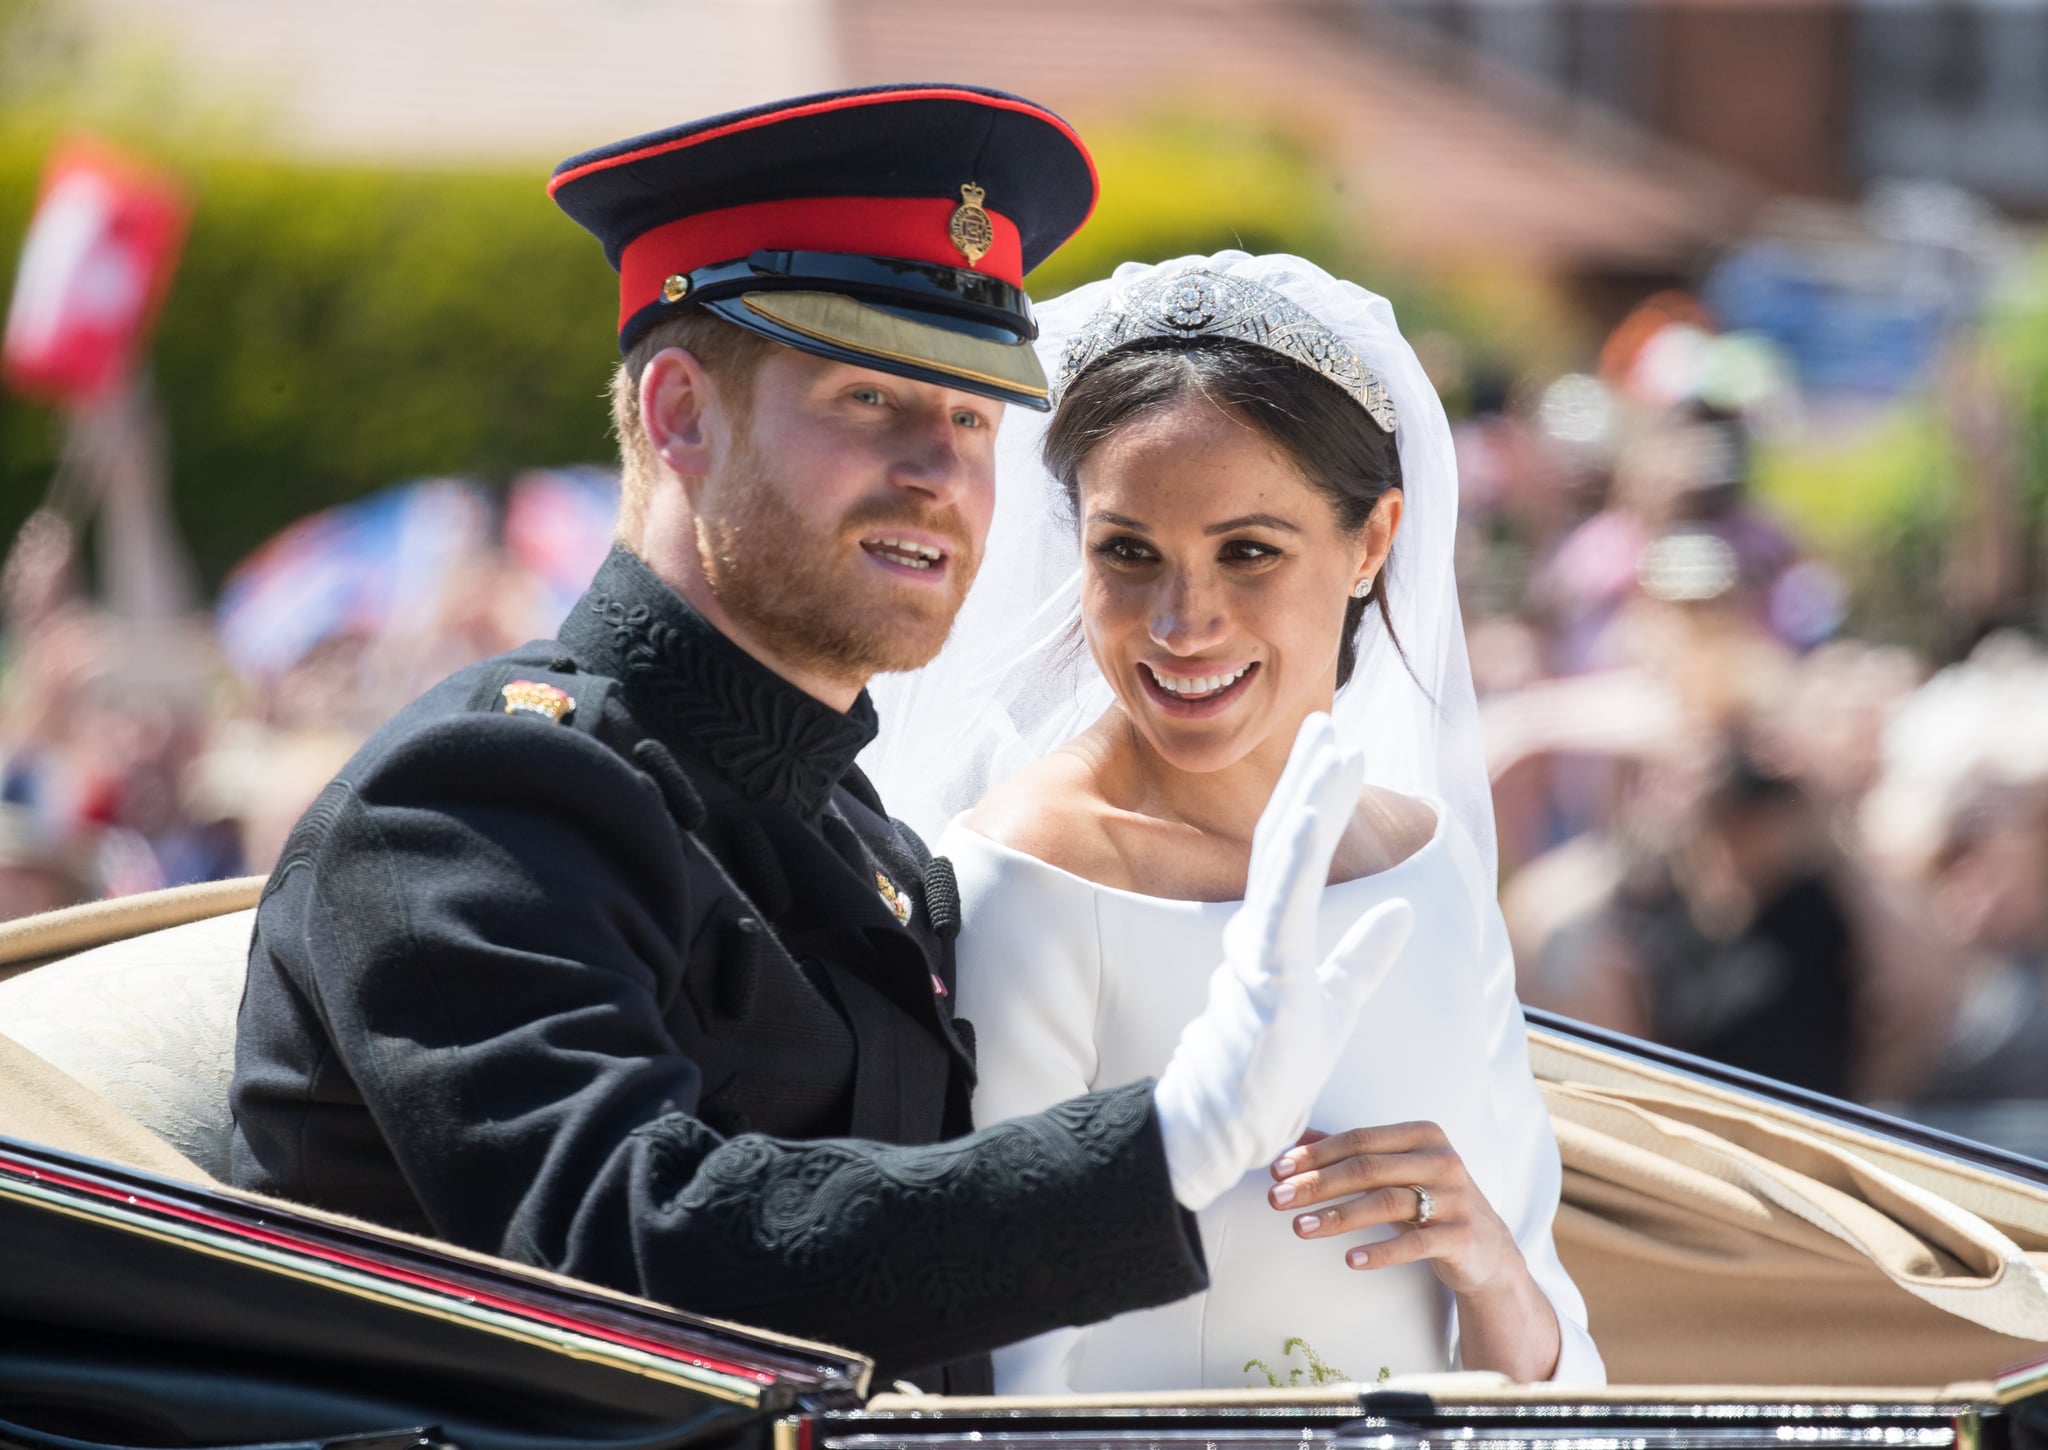 WINDSOR, ENGLAND - MAY 19:  Prince Harry, Duke of Sussex and Meghan, Duchess of Sussex ride by carriage following their wedding at St George